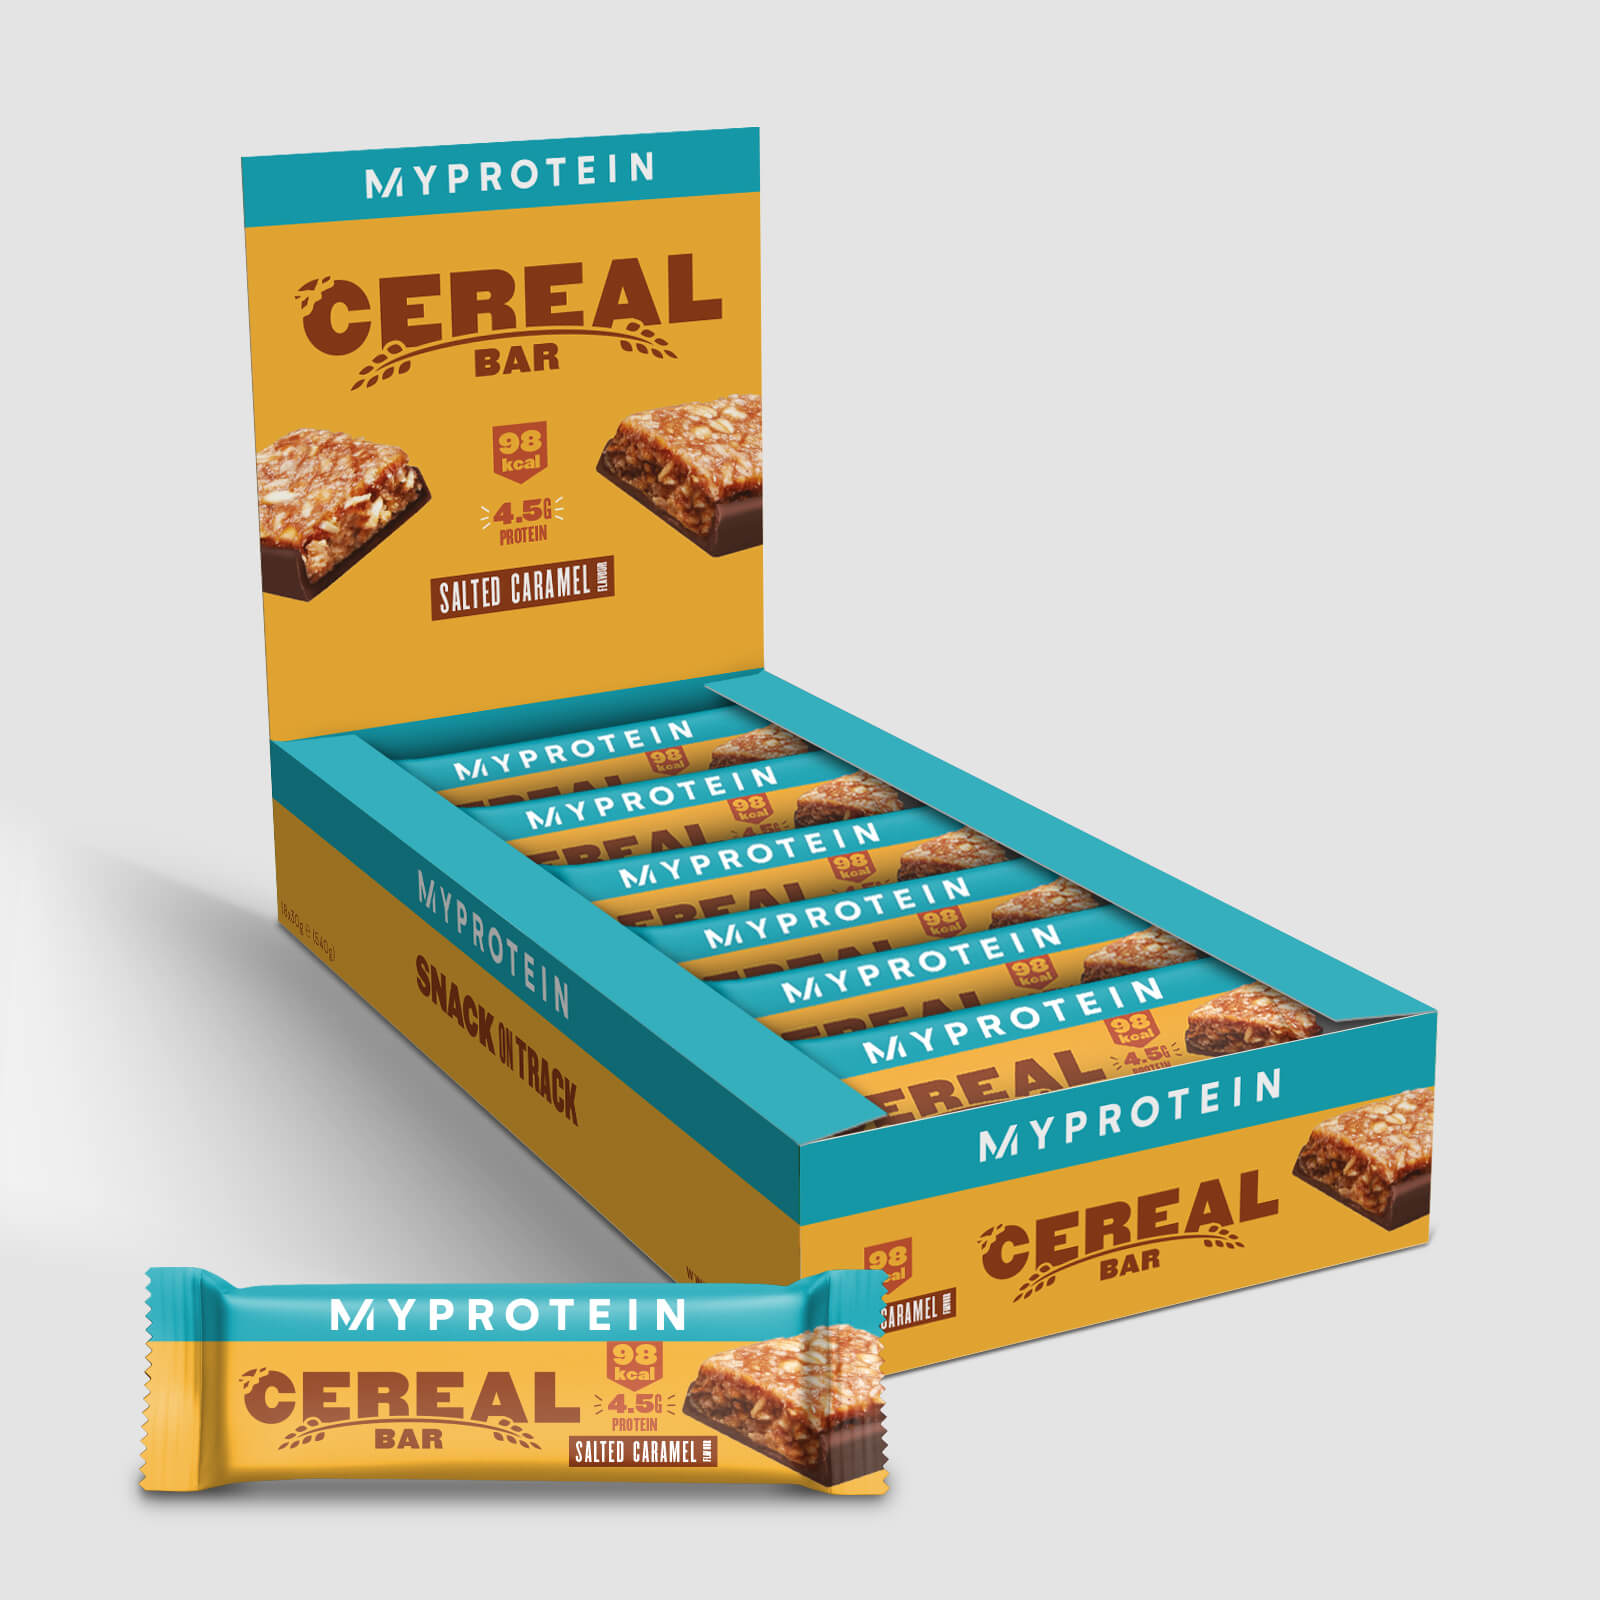 Myprotein Cereal Bar - 18 x 30g - Ny - Salted Caramel